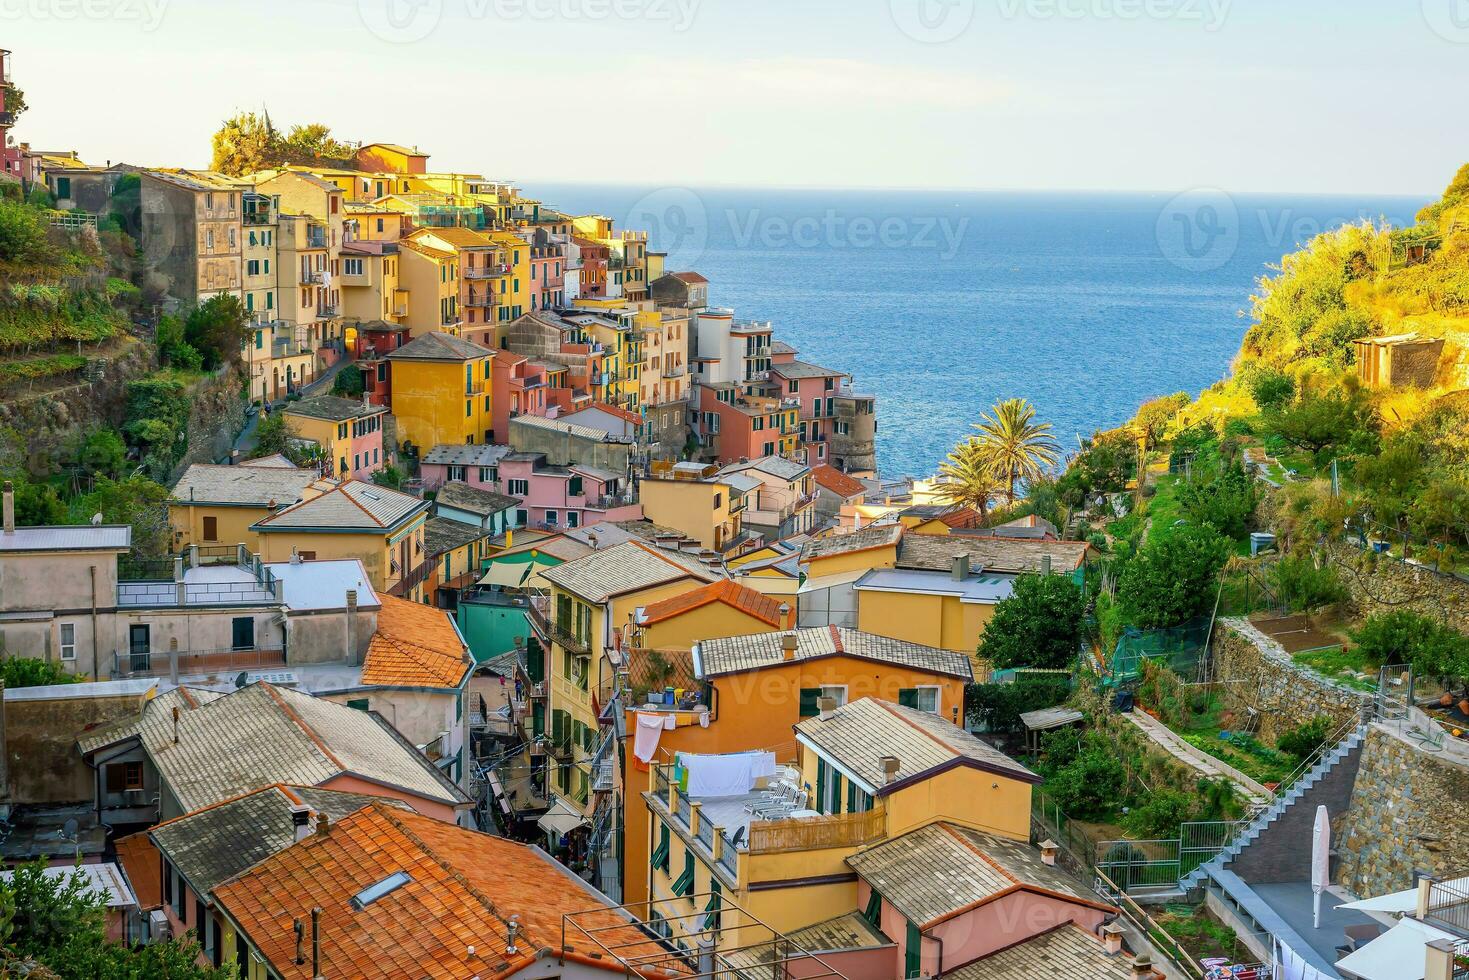 Colorful cityscape of buildings over Mediterranean sea, Europe, Cinque Terre in Italy photo